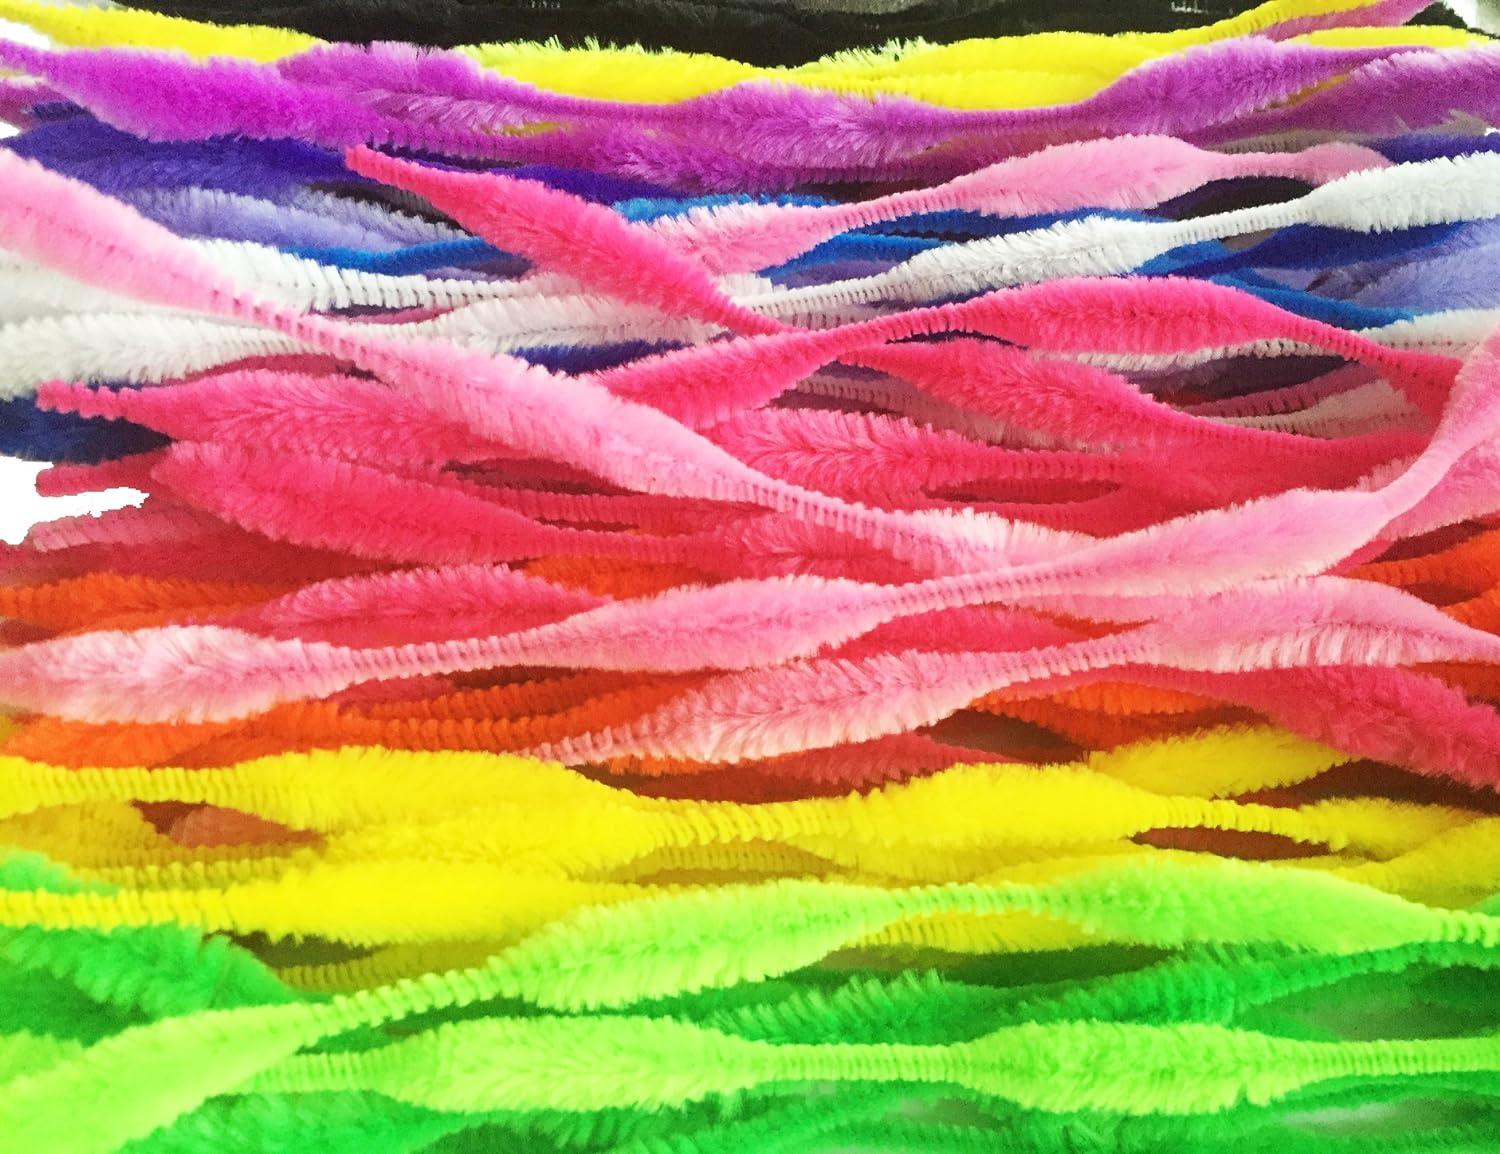 Caryko Super Fuzzy Chenille Stems Pipe Cleaners, Pack of 100 (Hot Pink)